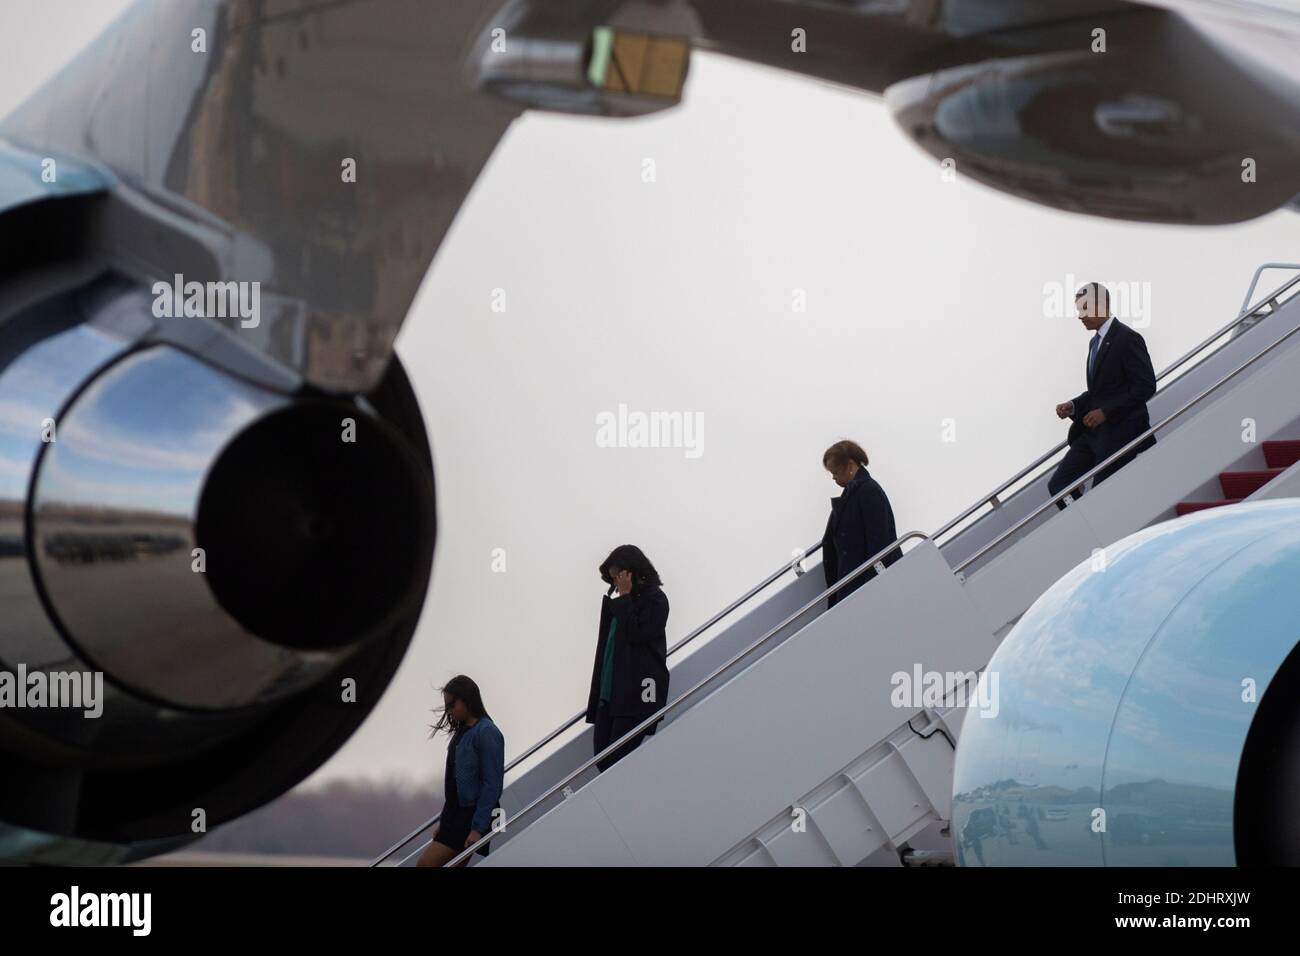 US President Barack Obama (R), with his mother in law Marion Robinson (2-R), First Lady Michelle Obama (2-L) and daughter Sasha (L), step off Air Force One at Joint Base Andrews, Maryland, USA, 25 March 2016. President Obama returned on the over night flight from his trip to Cuba and Argentina. Photo by Shawn Thew/Pool/ABACAPRESS.COM Stock Photo